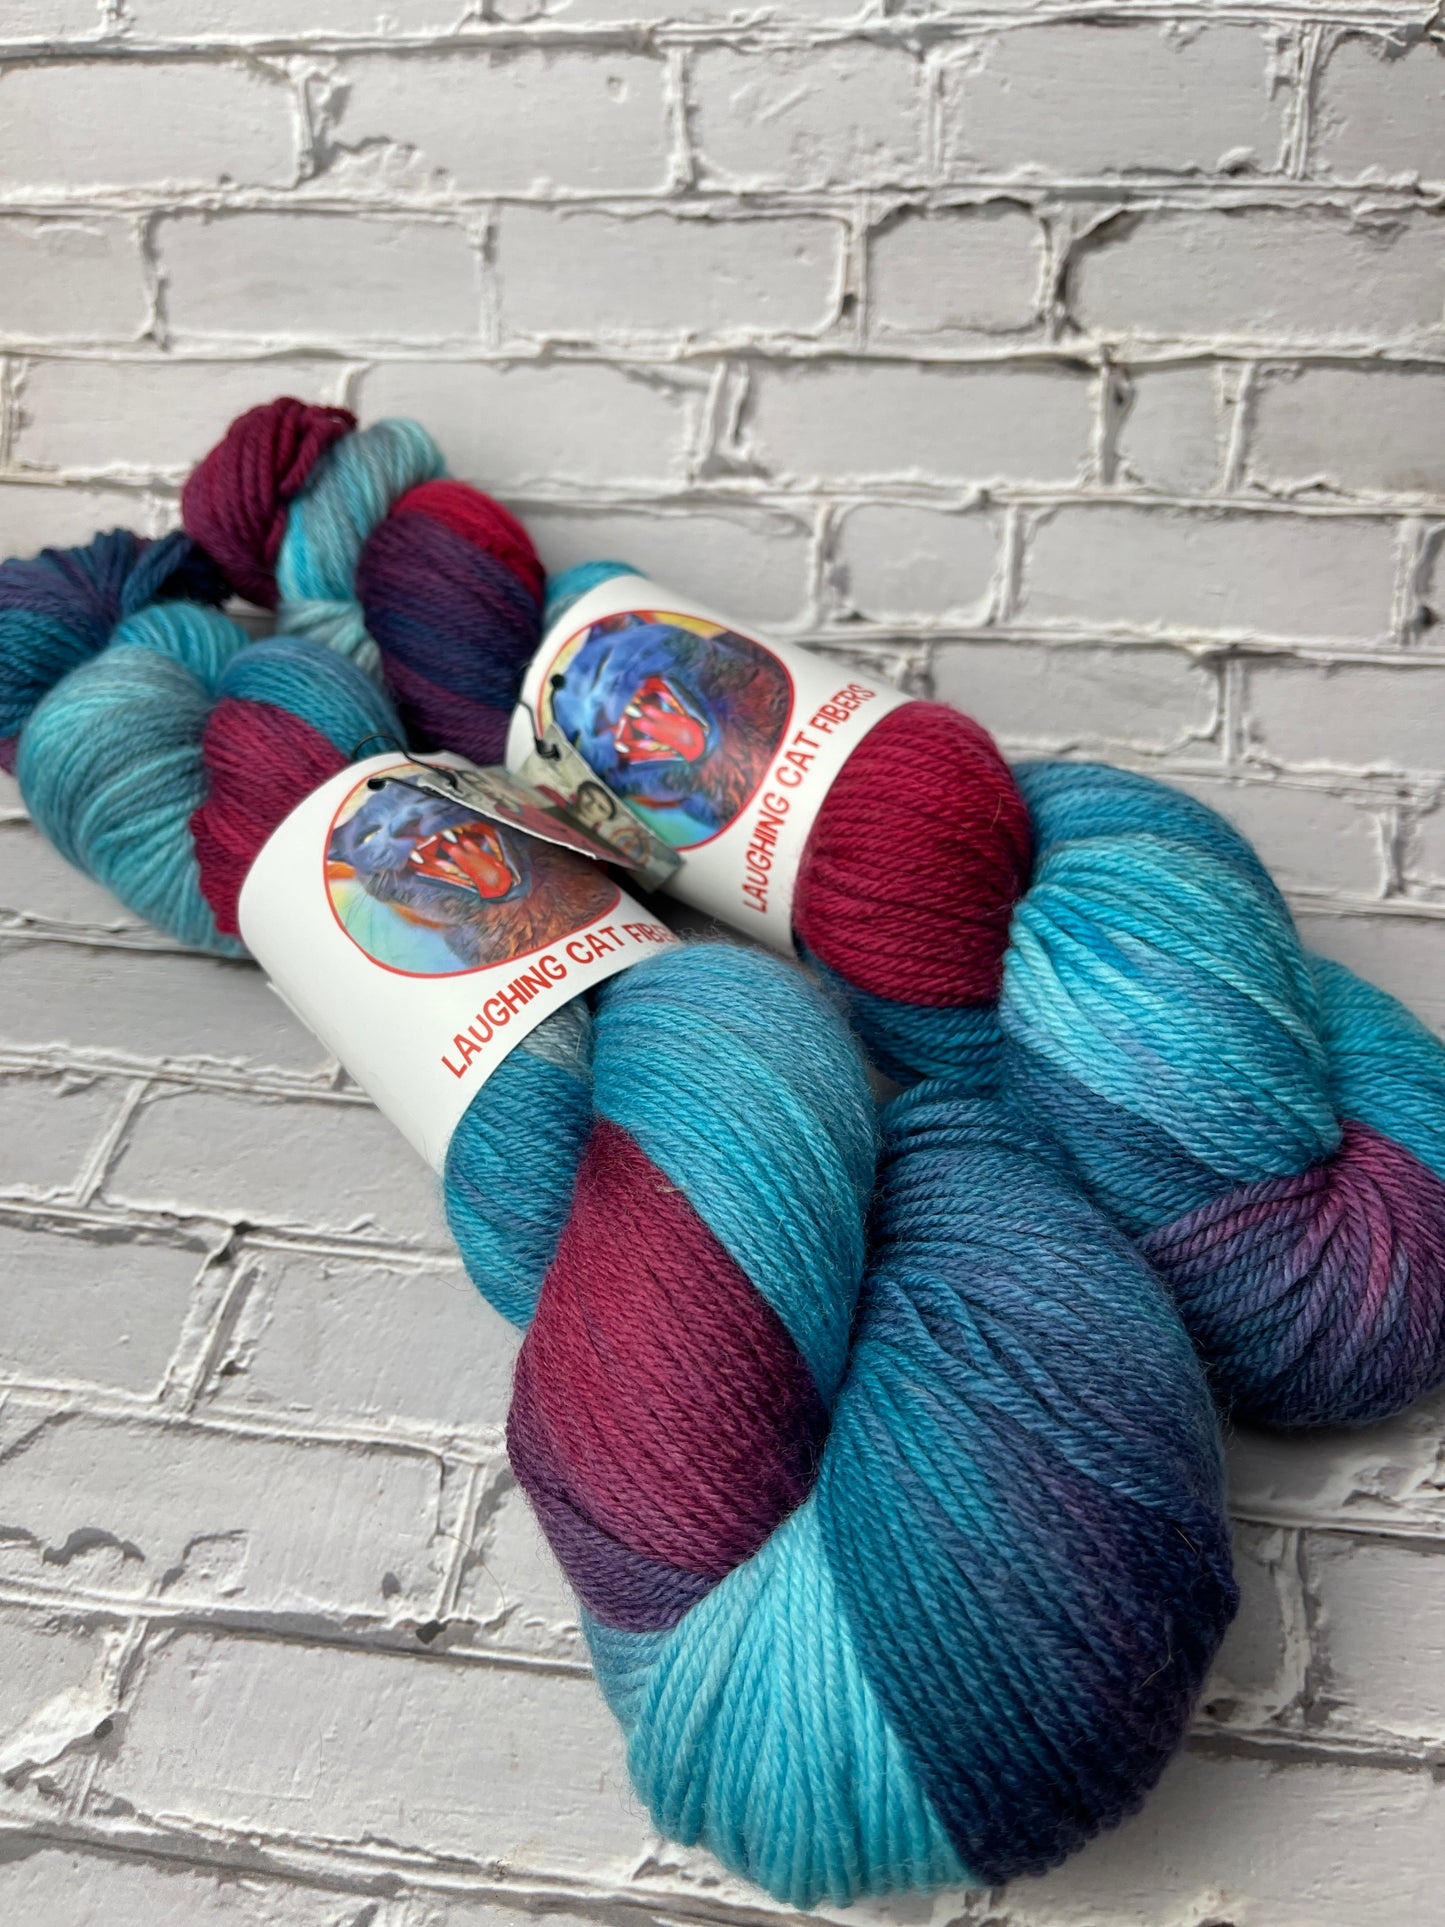 "La Rosa de Guadalupe" on Various Yarn Bases